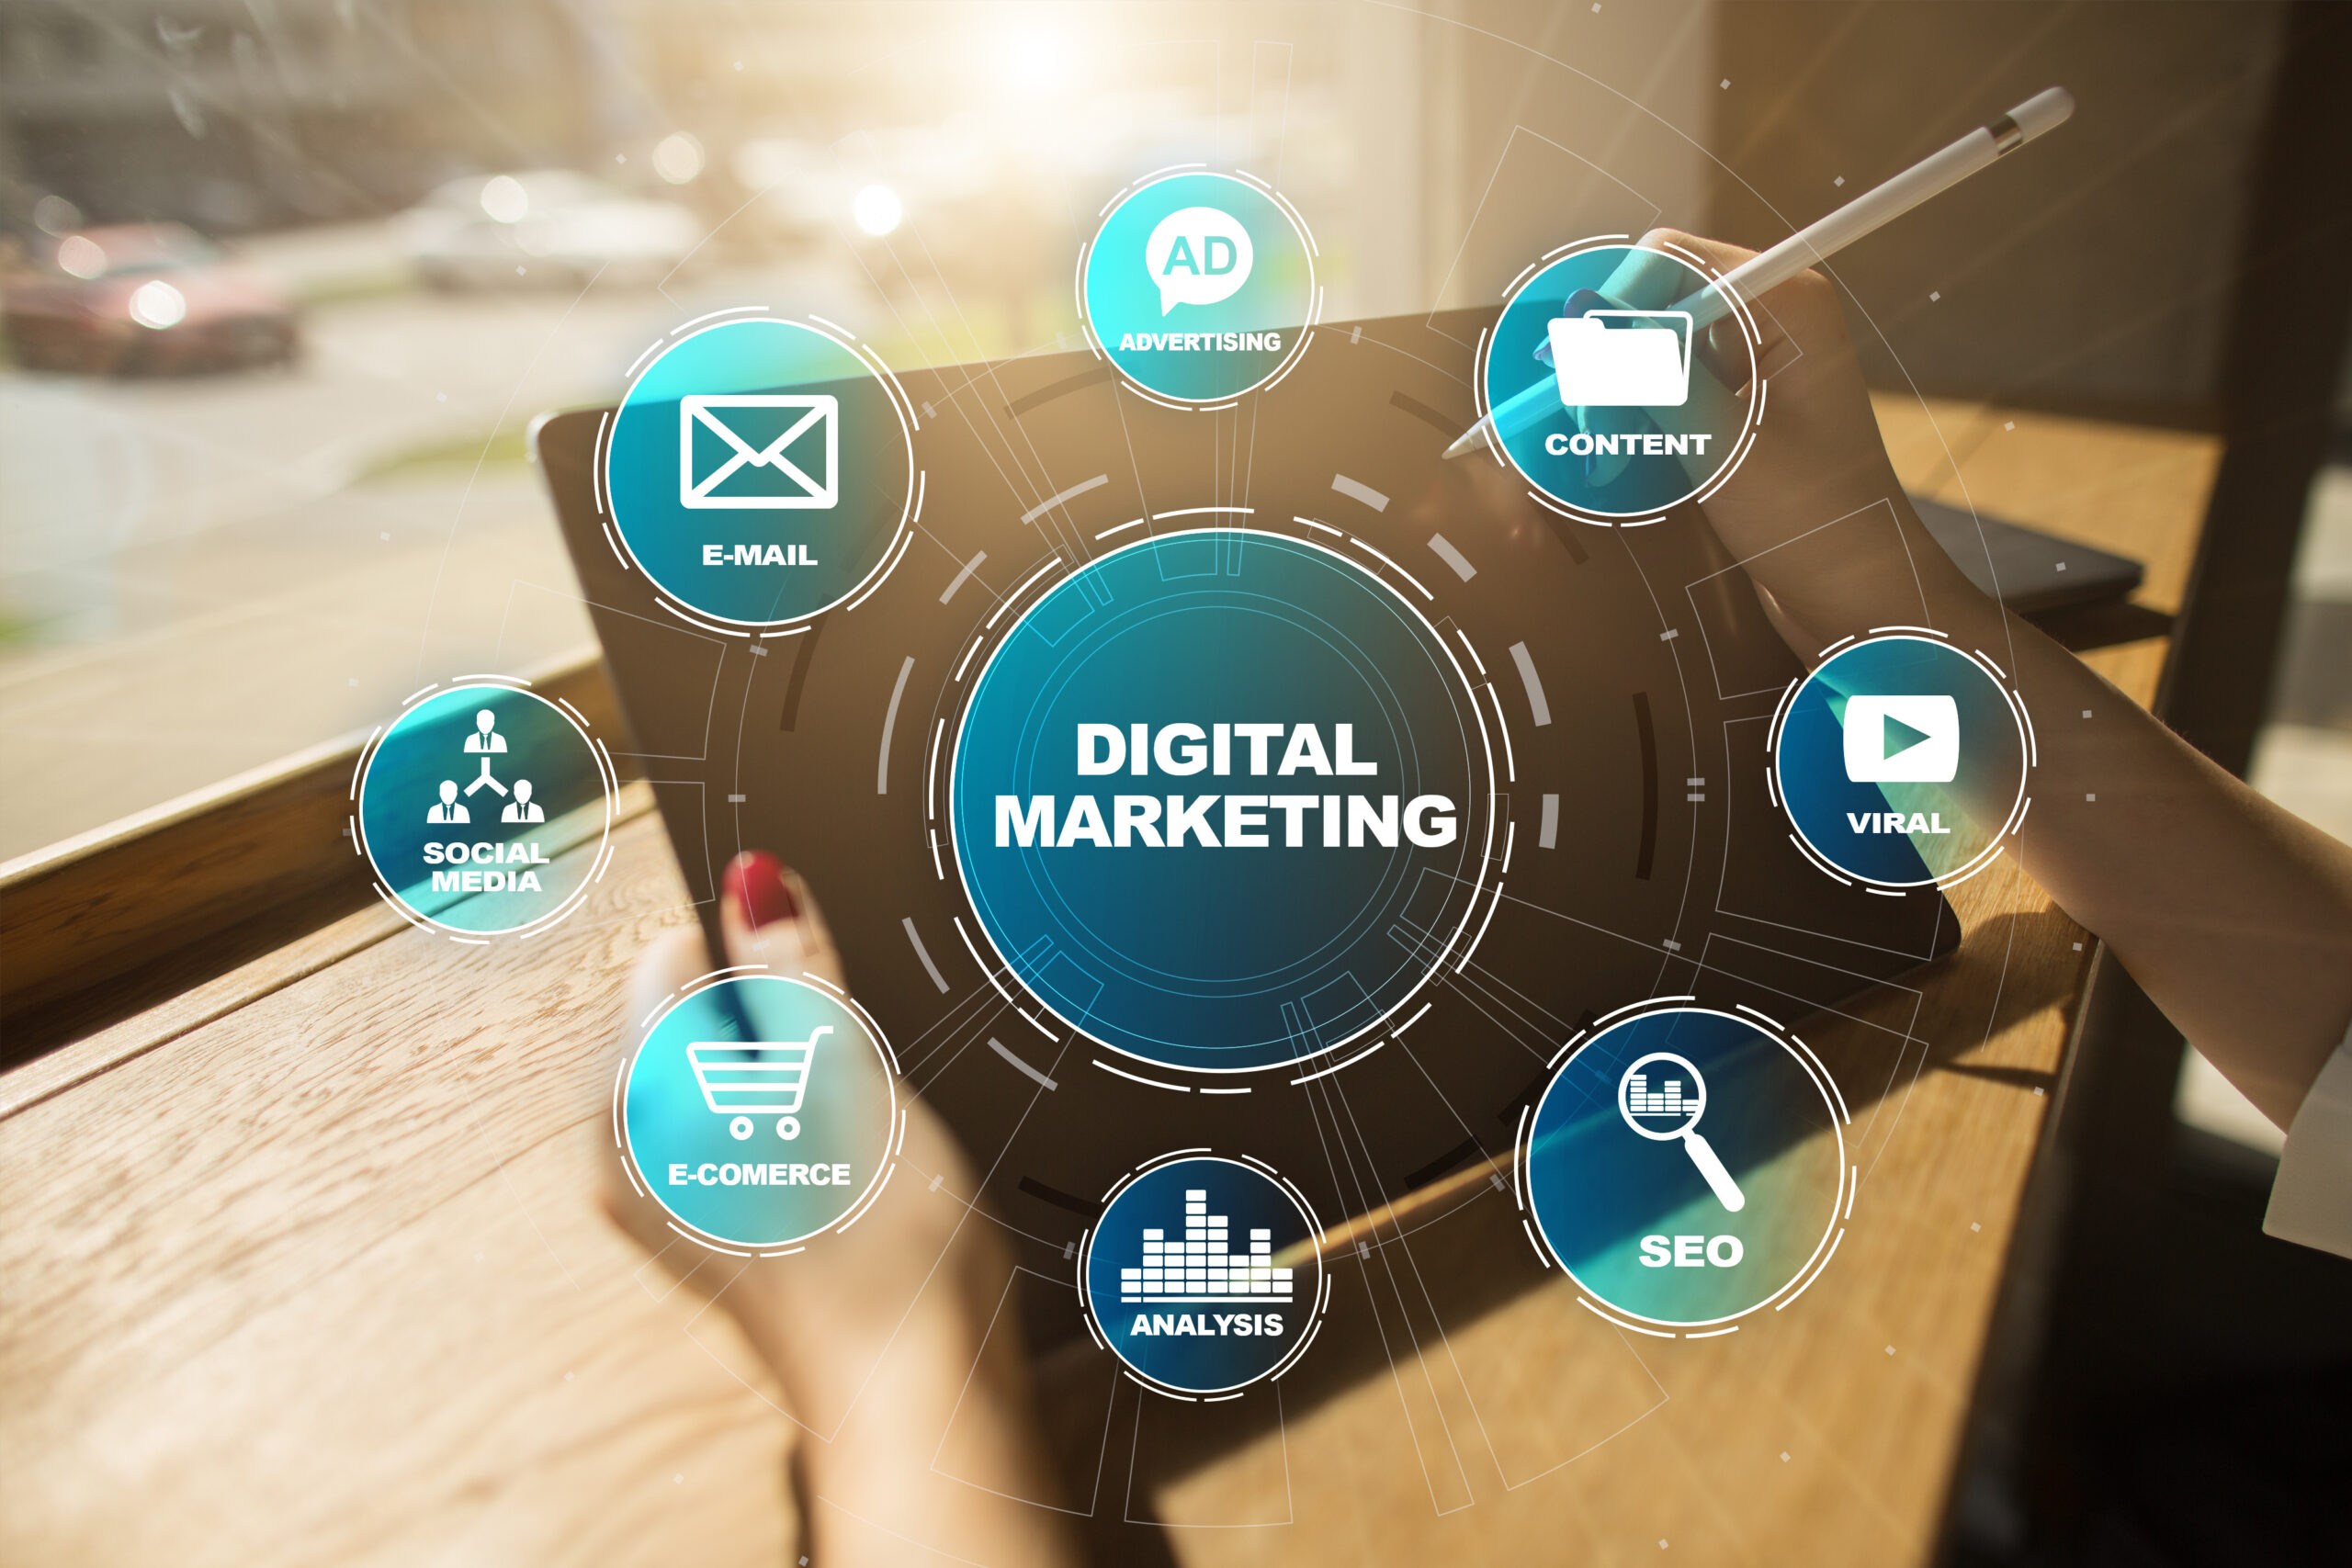 Digital Marketing Strategy For Multifamily Real Estate In 2021